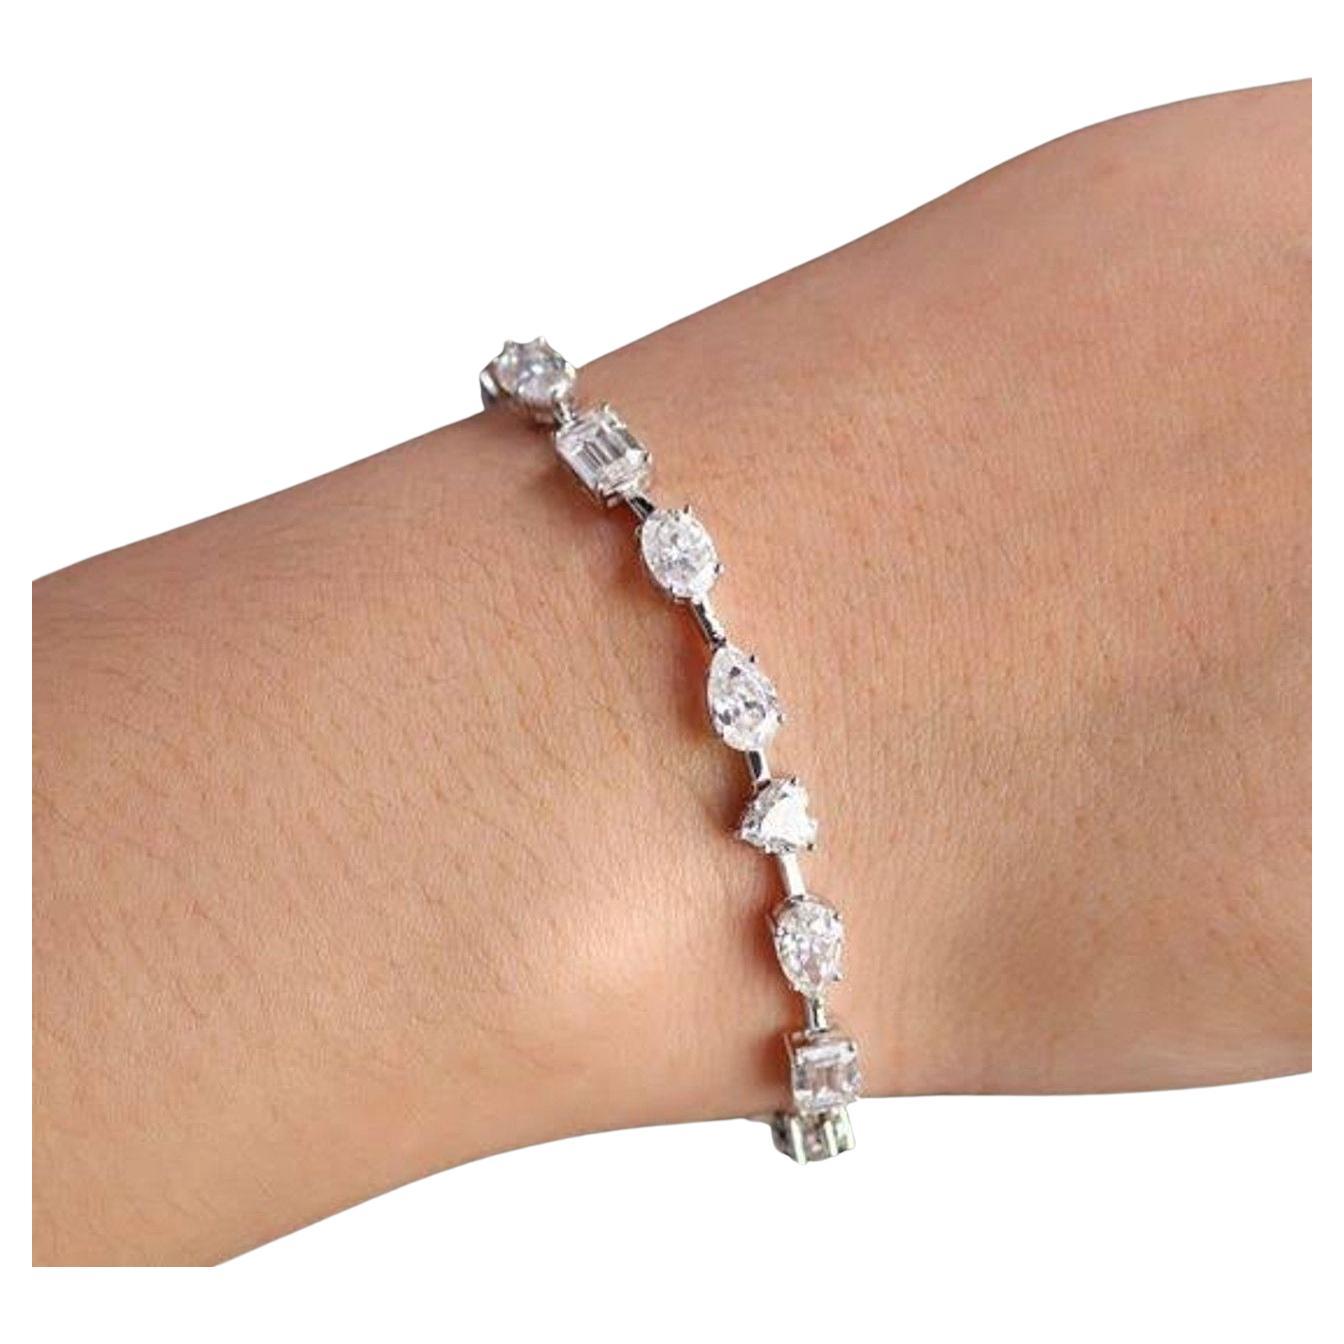 Mismatched Mixed Fancy Cut Diamond Bracelet

Discover the artistry of individuality with our Mismatch Mixed Fancy Cut Diamond Bracelet. This exceptional piece is a celebration of diversity, featuring various fancy cut diamonds set in a distinctive,